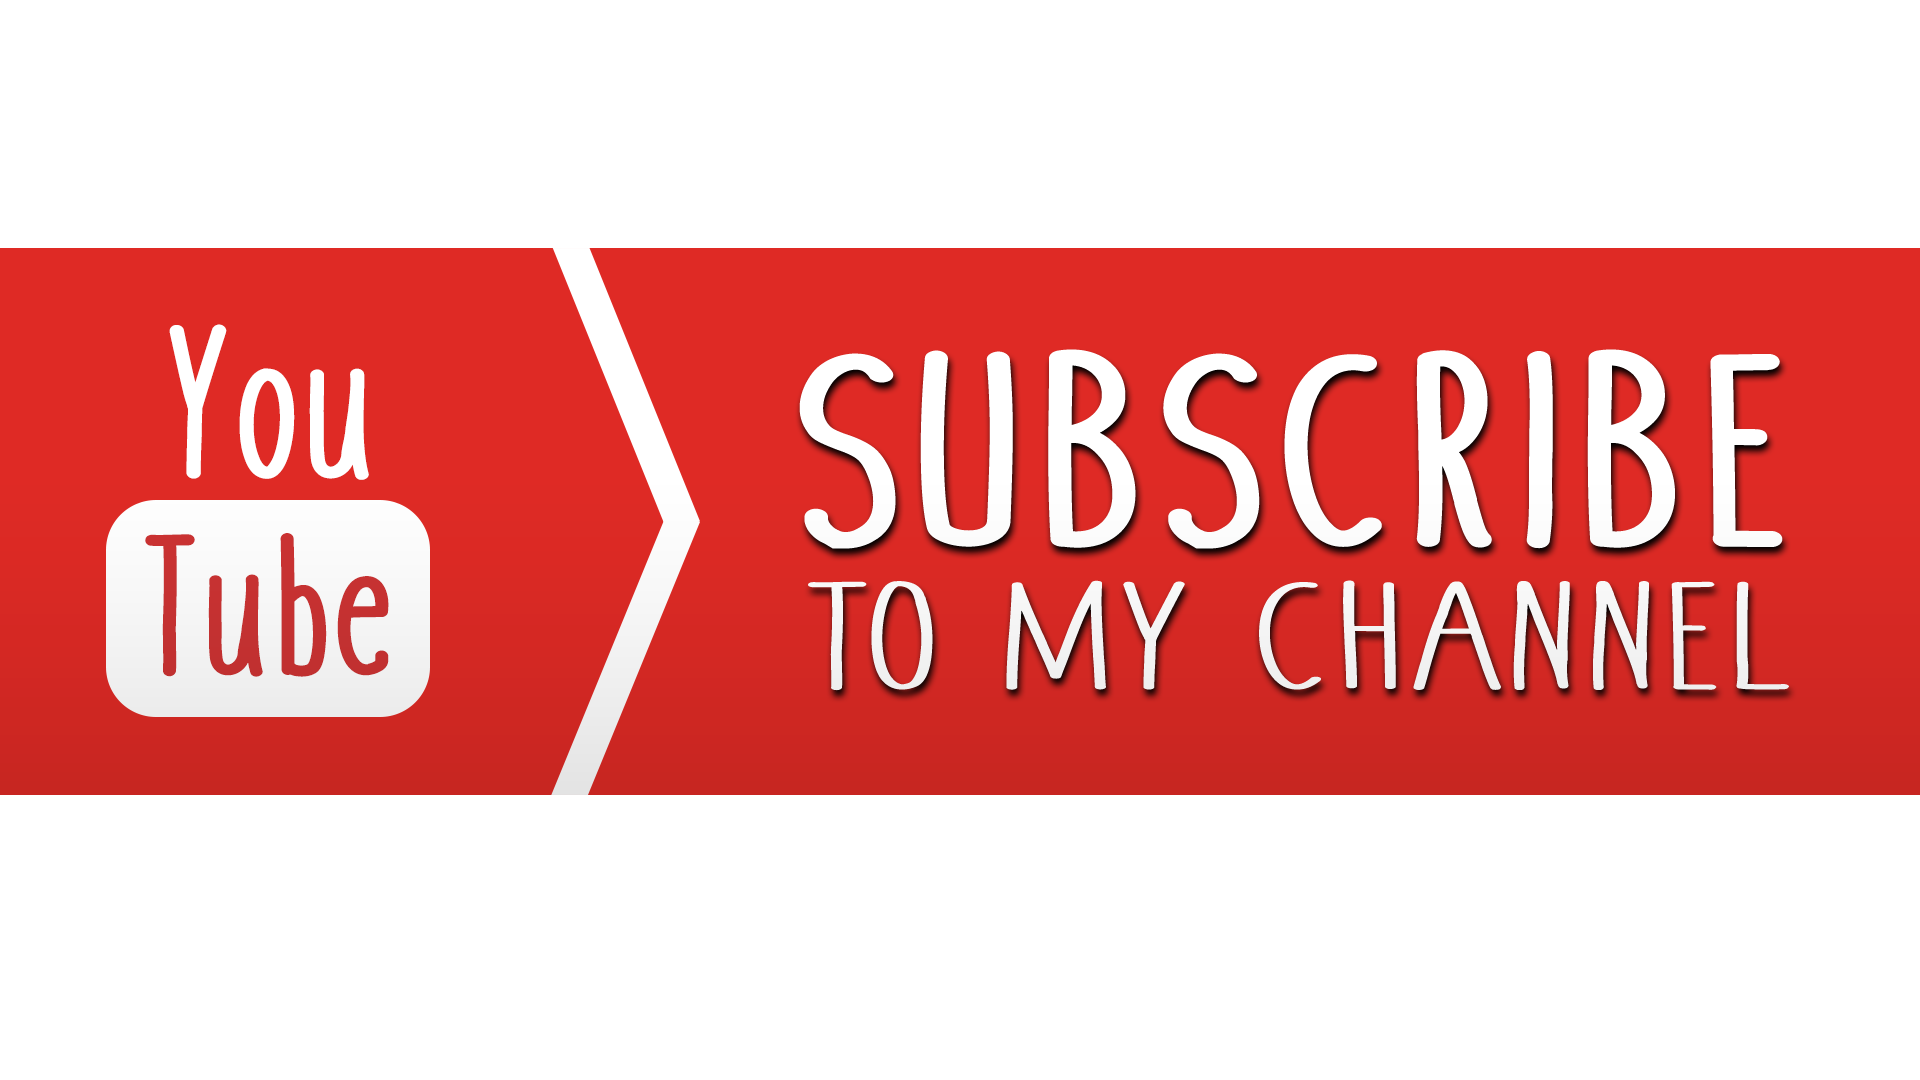 Subscribe Youtube Wallpapers Wallpaper Cave